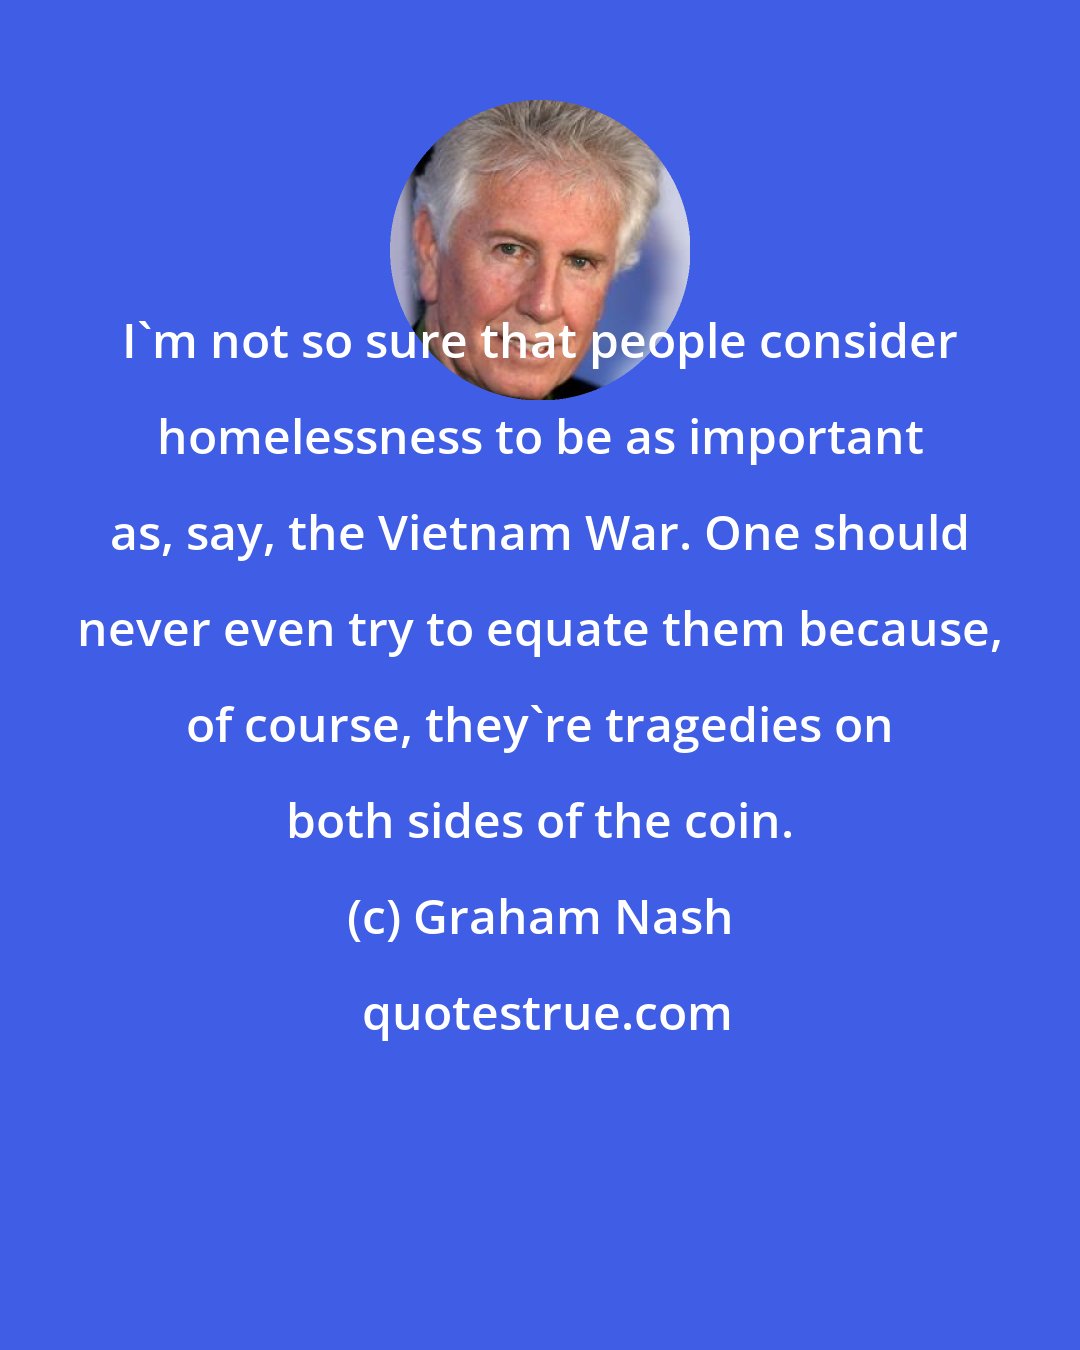 Graham Nash: I'm not so sure that people consider homelessness to be as important as, say, the Vietnam War. One should never even try to equate them because, of course, they're tragedies on both sides of the coin.